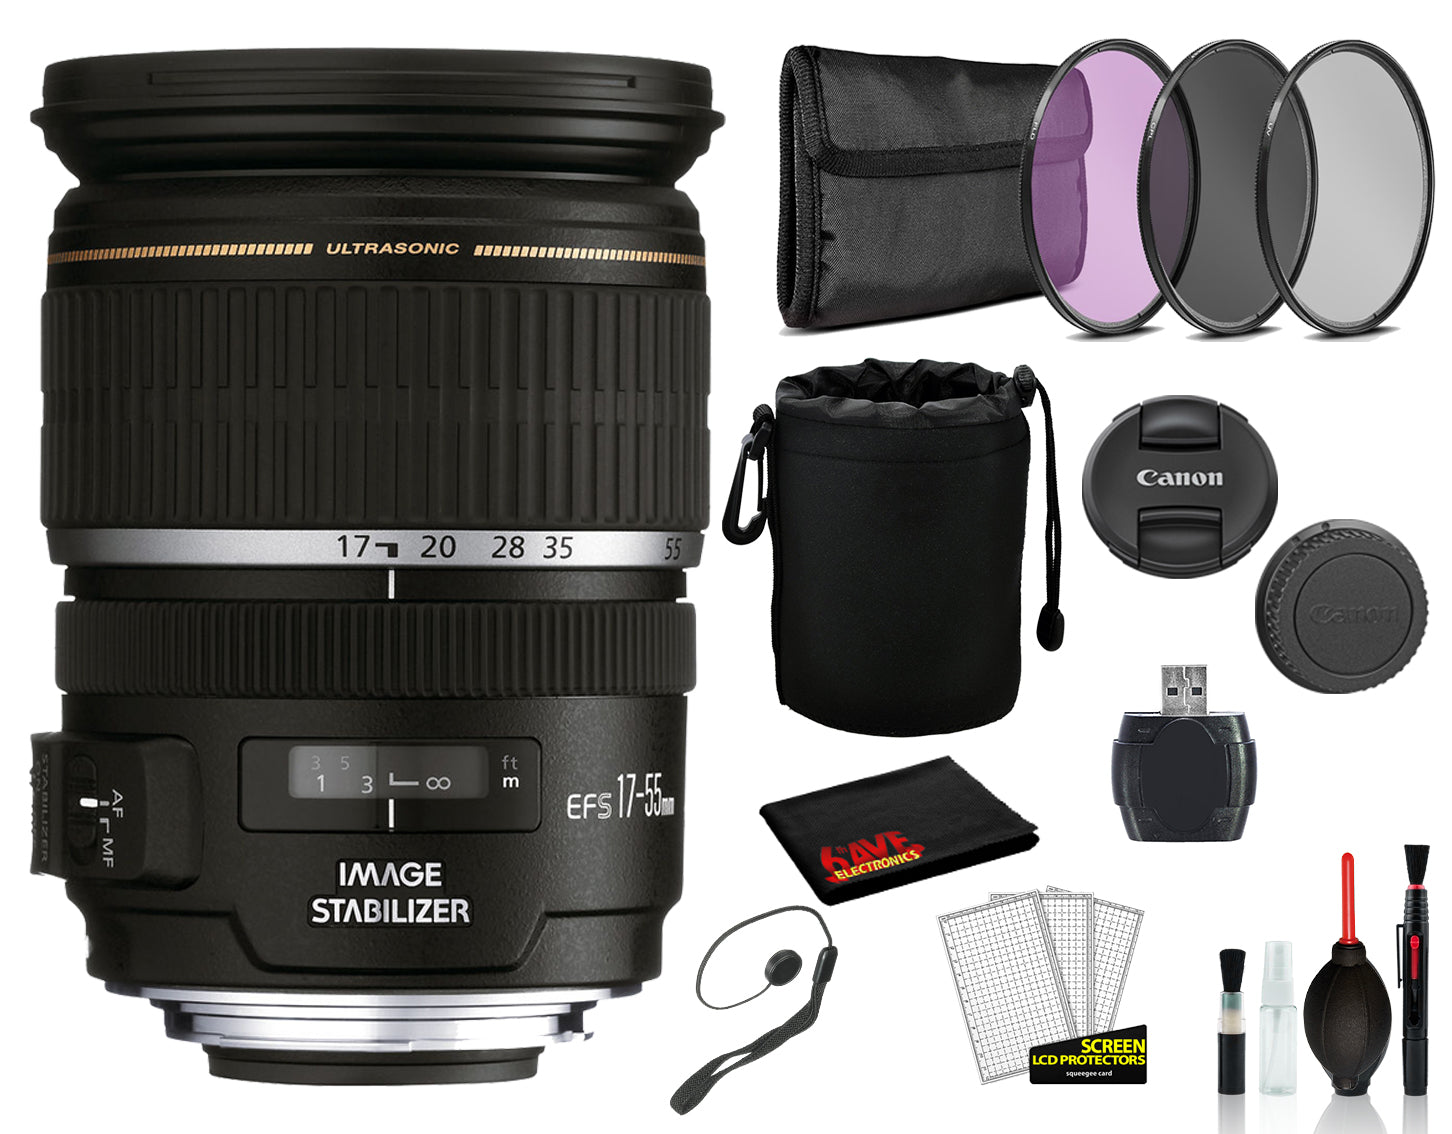 Canon EF-S 17-55mm f/2.8 IS USM Lens  (1242B002) Lens with Bundle  includes 3pc Filter Kit + Lens Pouch + More